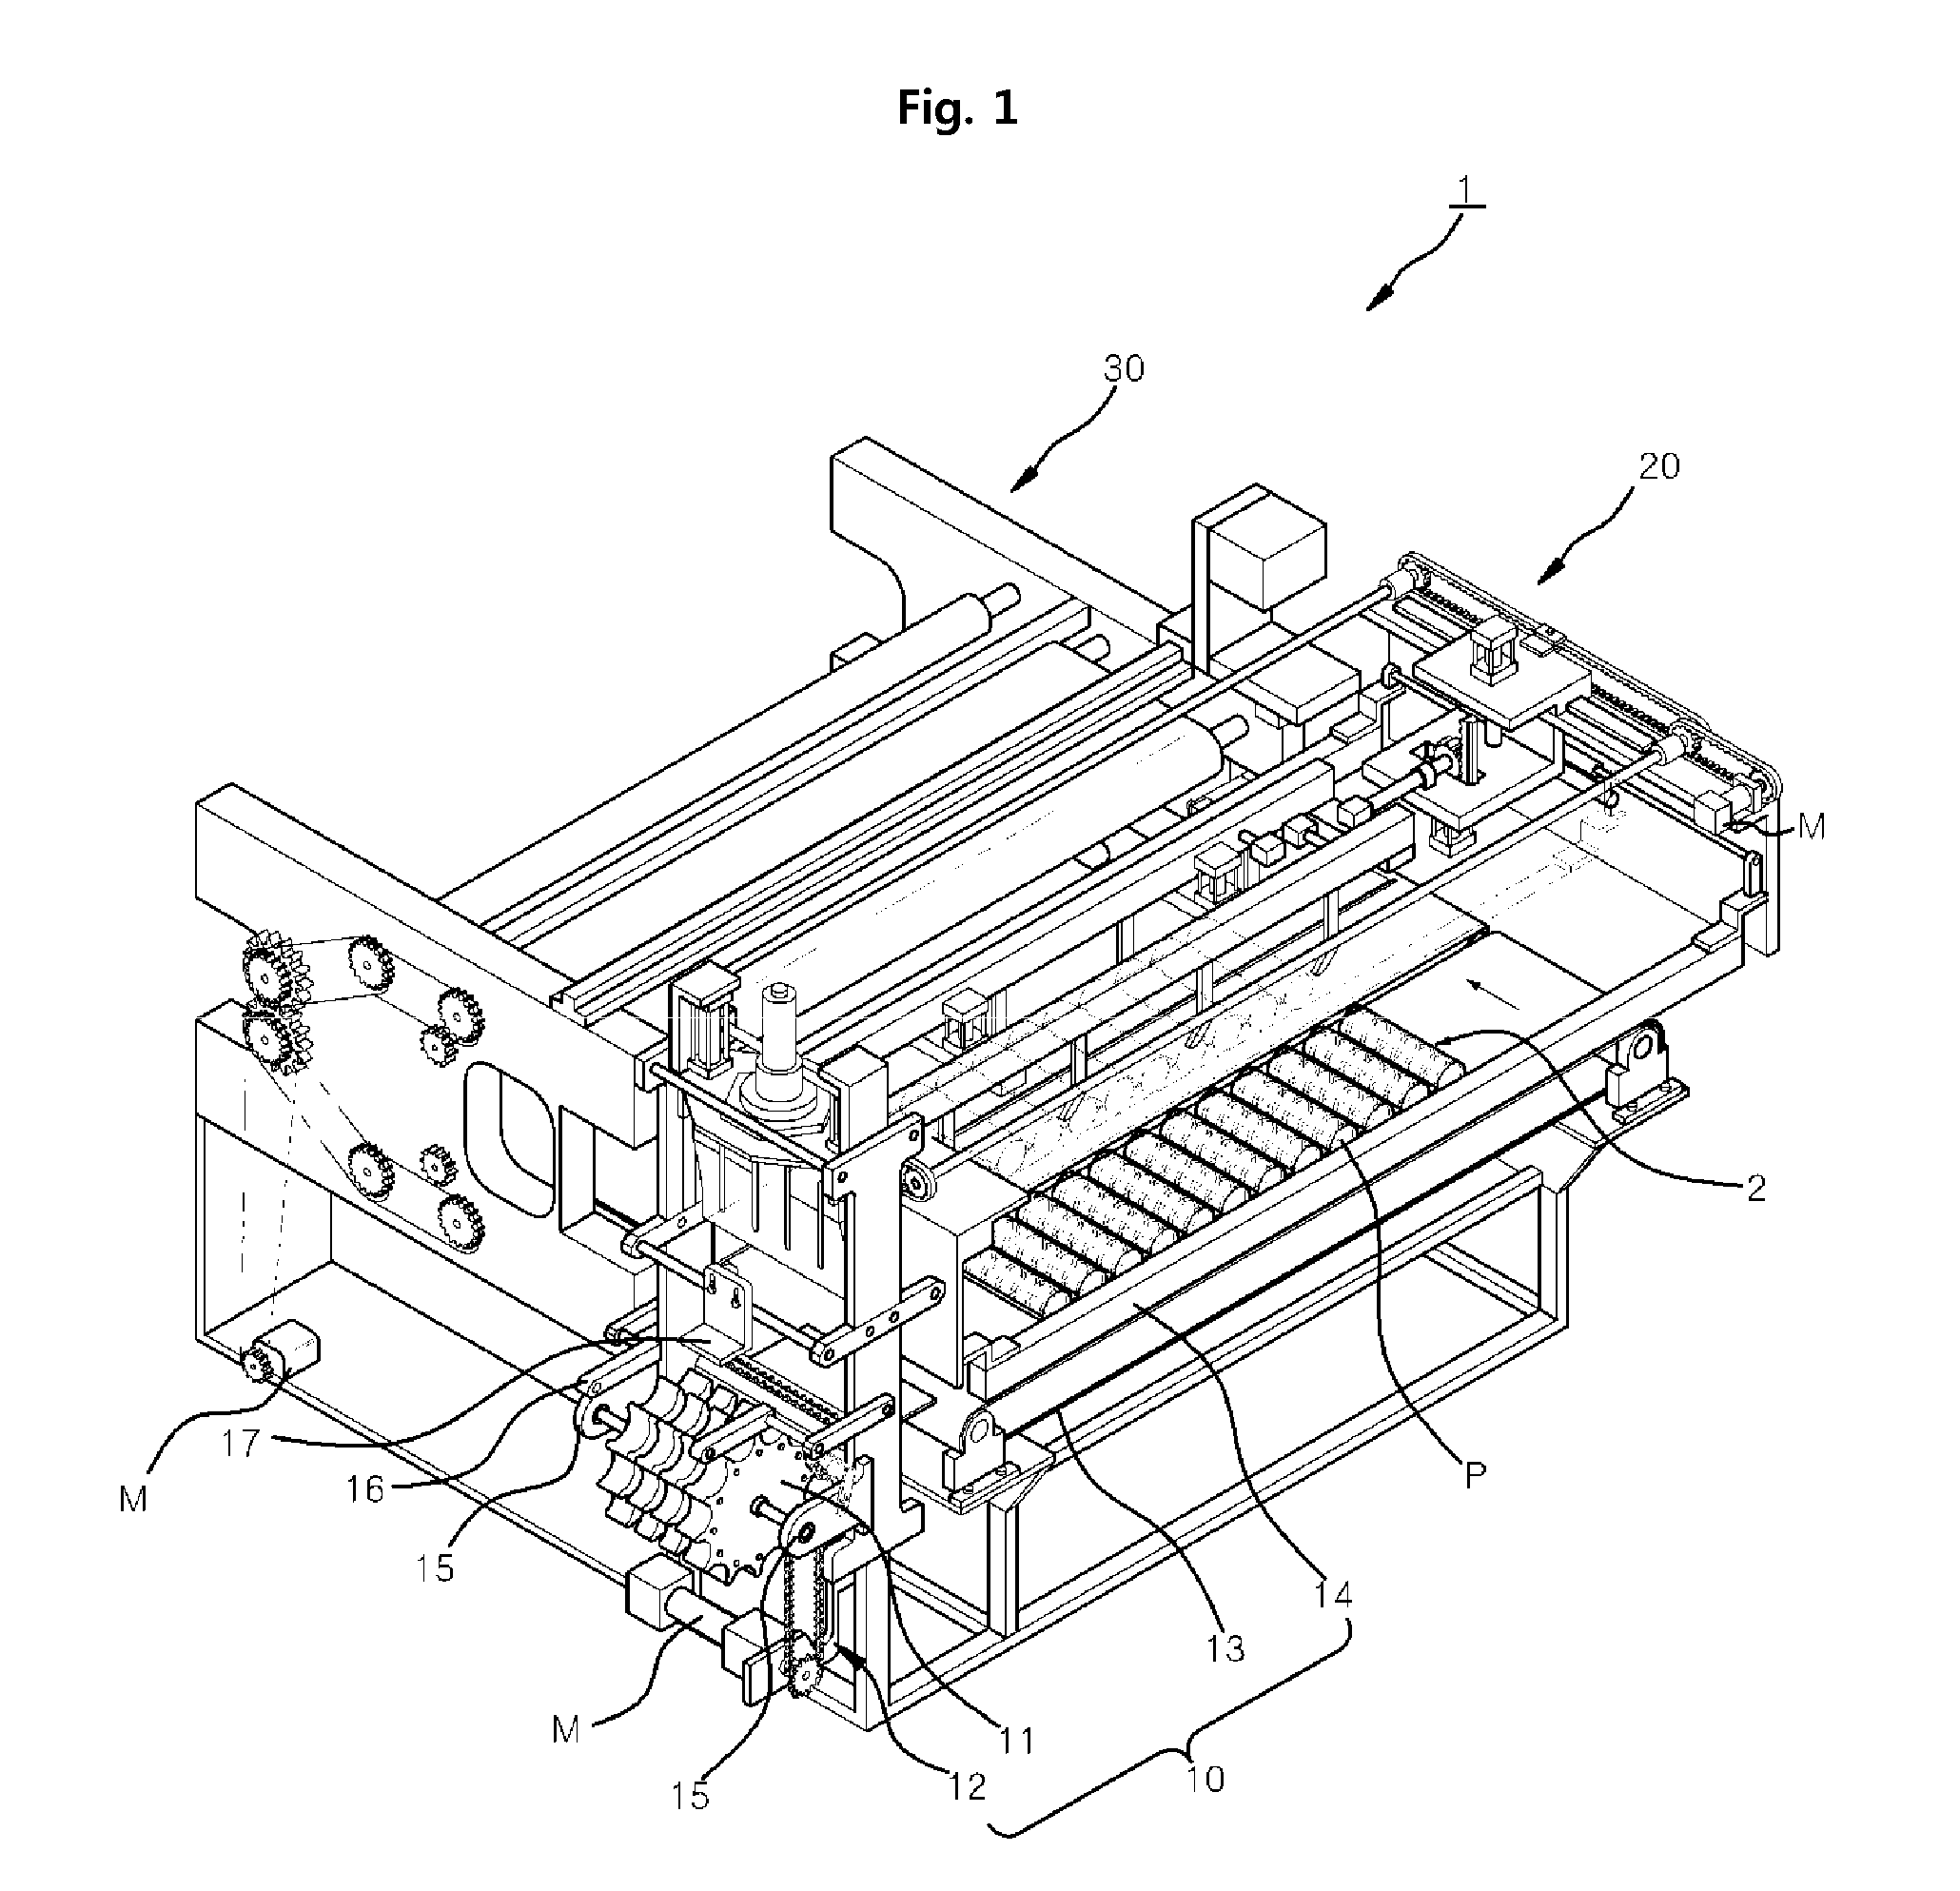 Device and method for producing functional pocket spring mattress, and mattress produced thereby